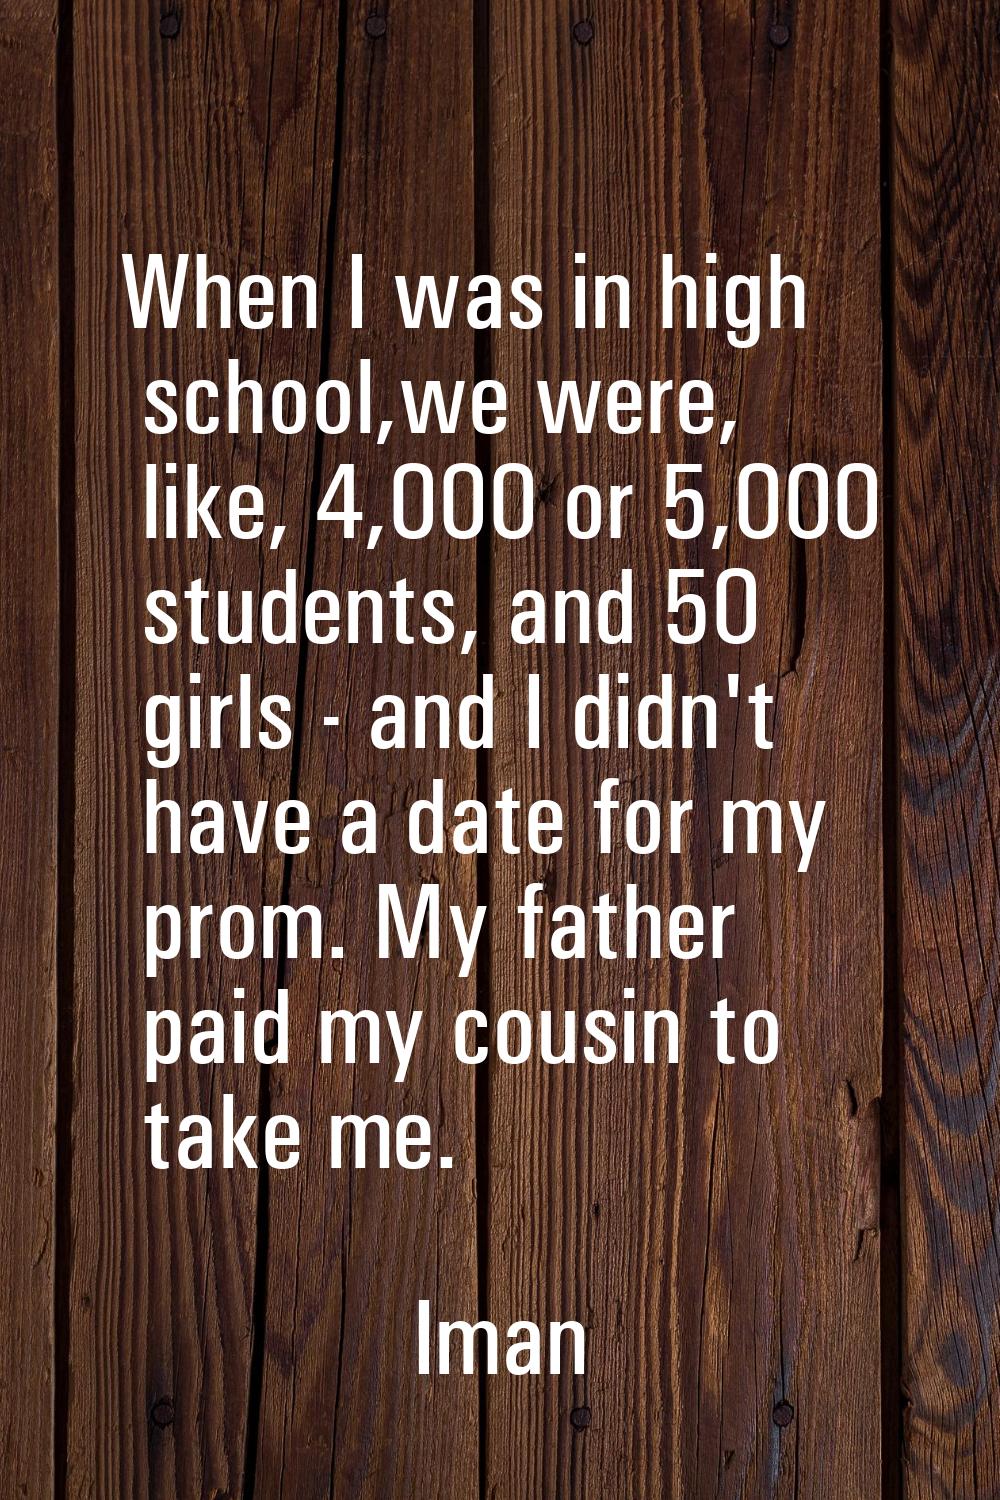 When I was in high school,we were, like, 4,000 or 5,000 students, and 50 girls - and I didn't have 